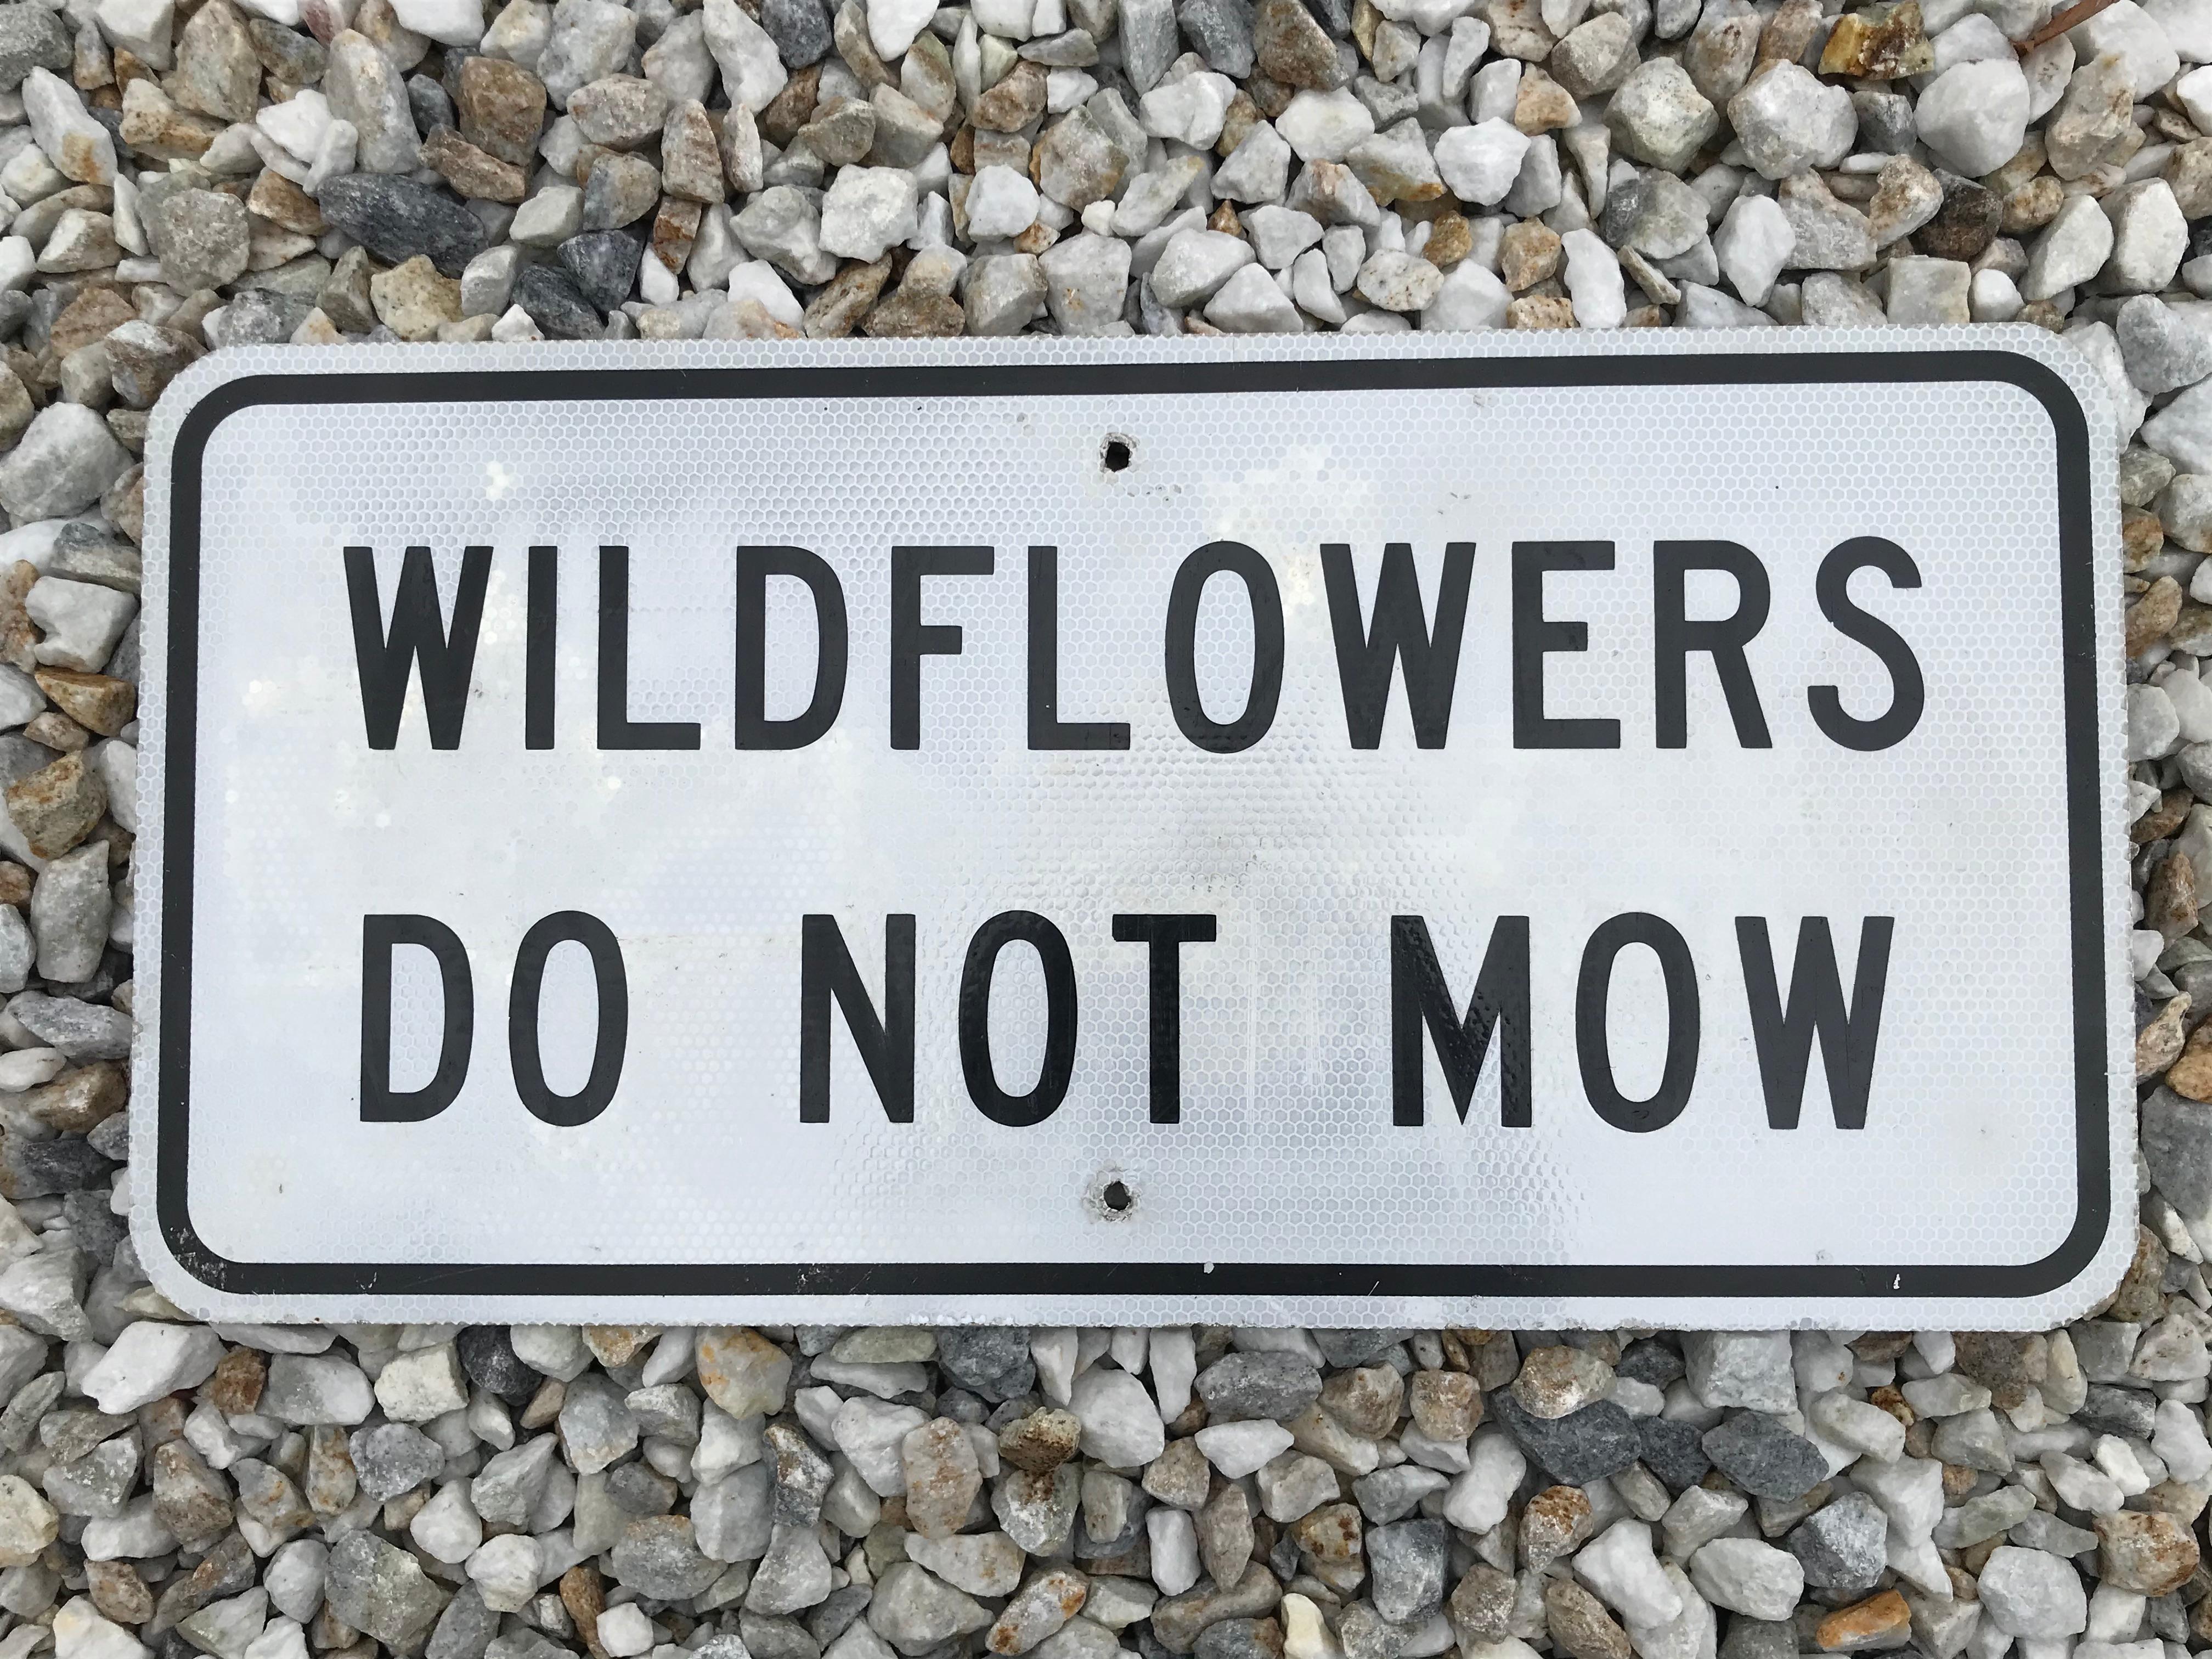 Great vintage highway sign that reads Wildflowers Do Not Mow. Reflective gray sign with black lettering and trim. Fun wall art and cool piece of transportation history.